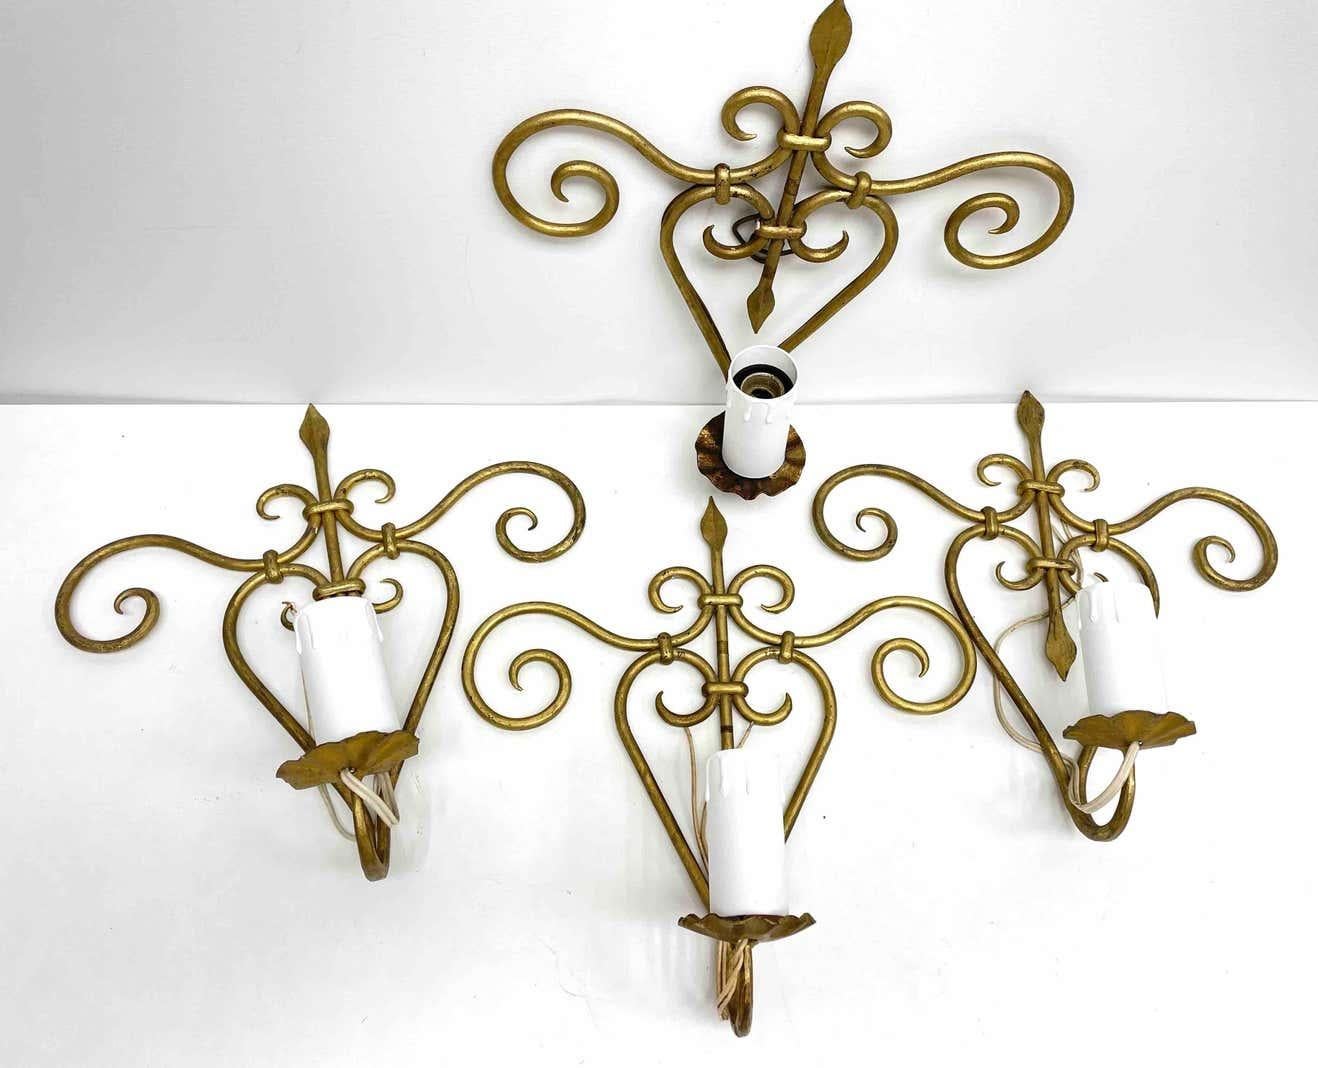 Two pair Hollywood Regency midcentury gilt floral tole sconces, each Fixture requires one European E27 / 110 Volt Edison bulbs, up to 60 watts. The wall lights have a beautiful patina and give each room an eclectic statement.